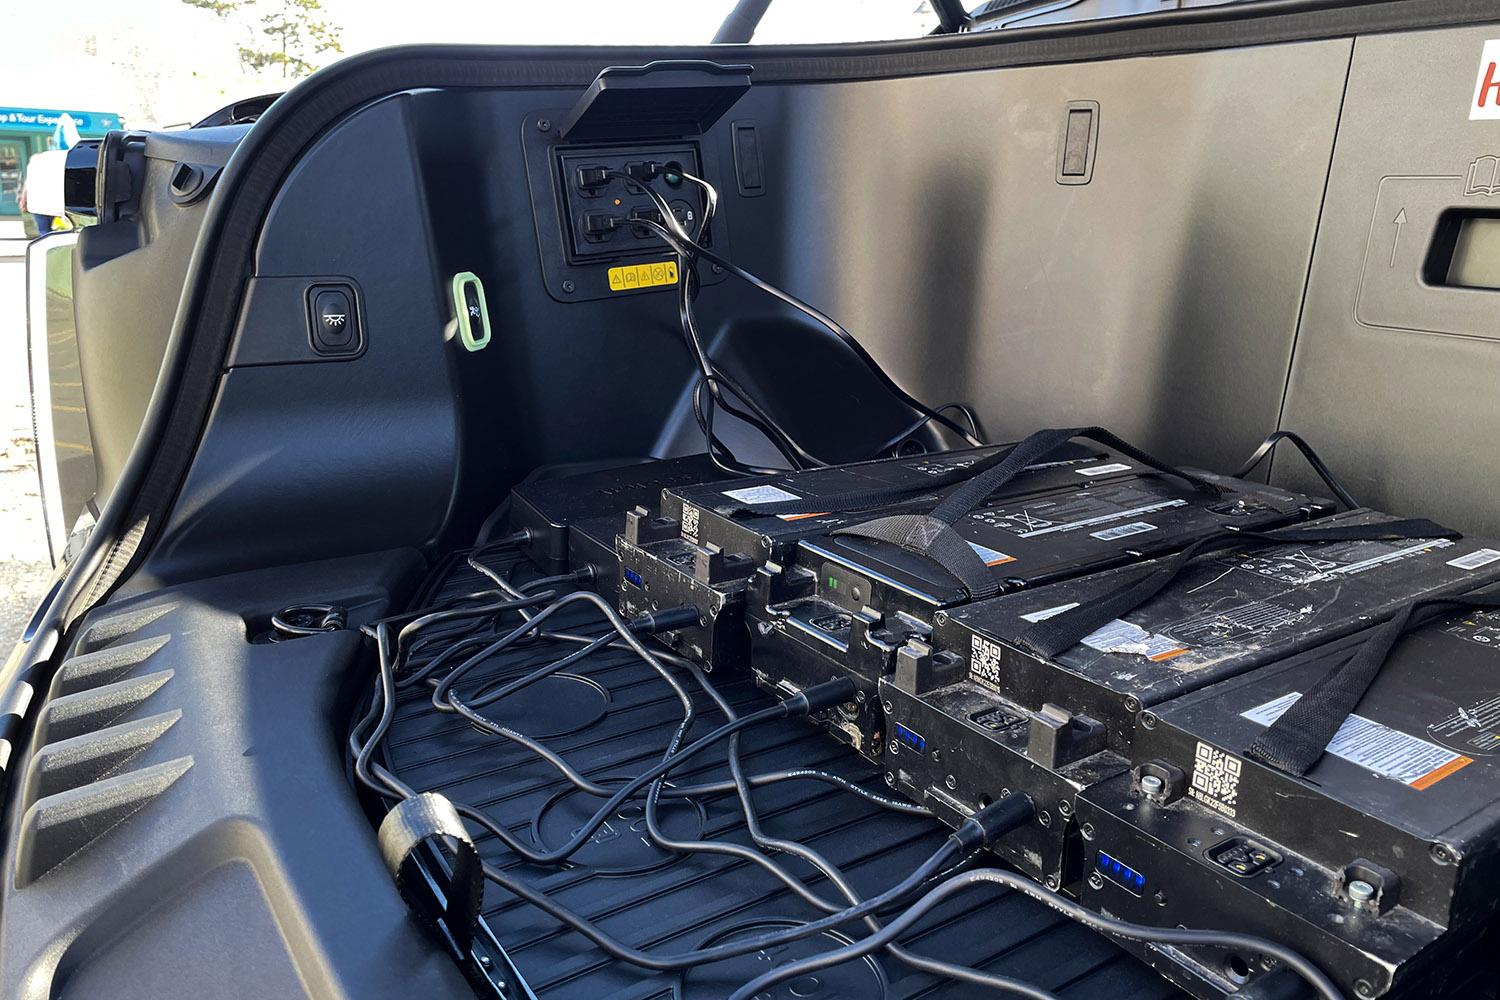 Max Rastelli uses a Ford F-150 Lightning with Pro Power Onboard for charging the scooter batteries of his business, HFX eScooters.